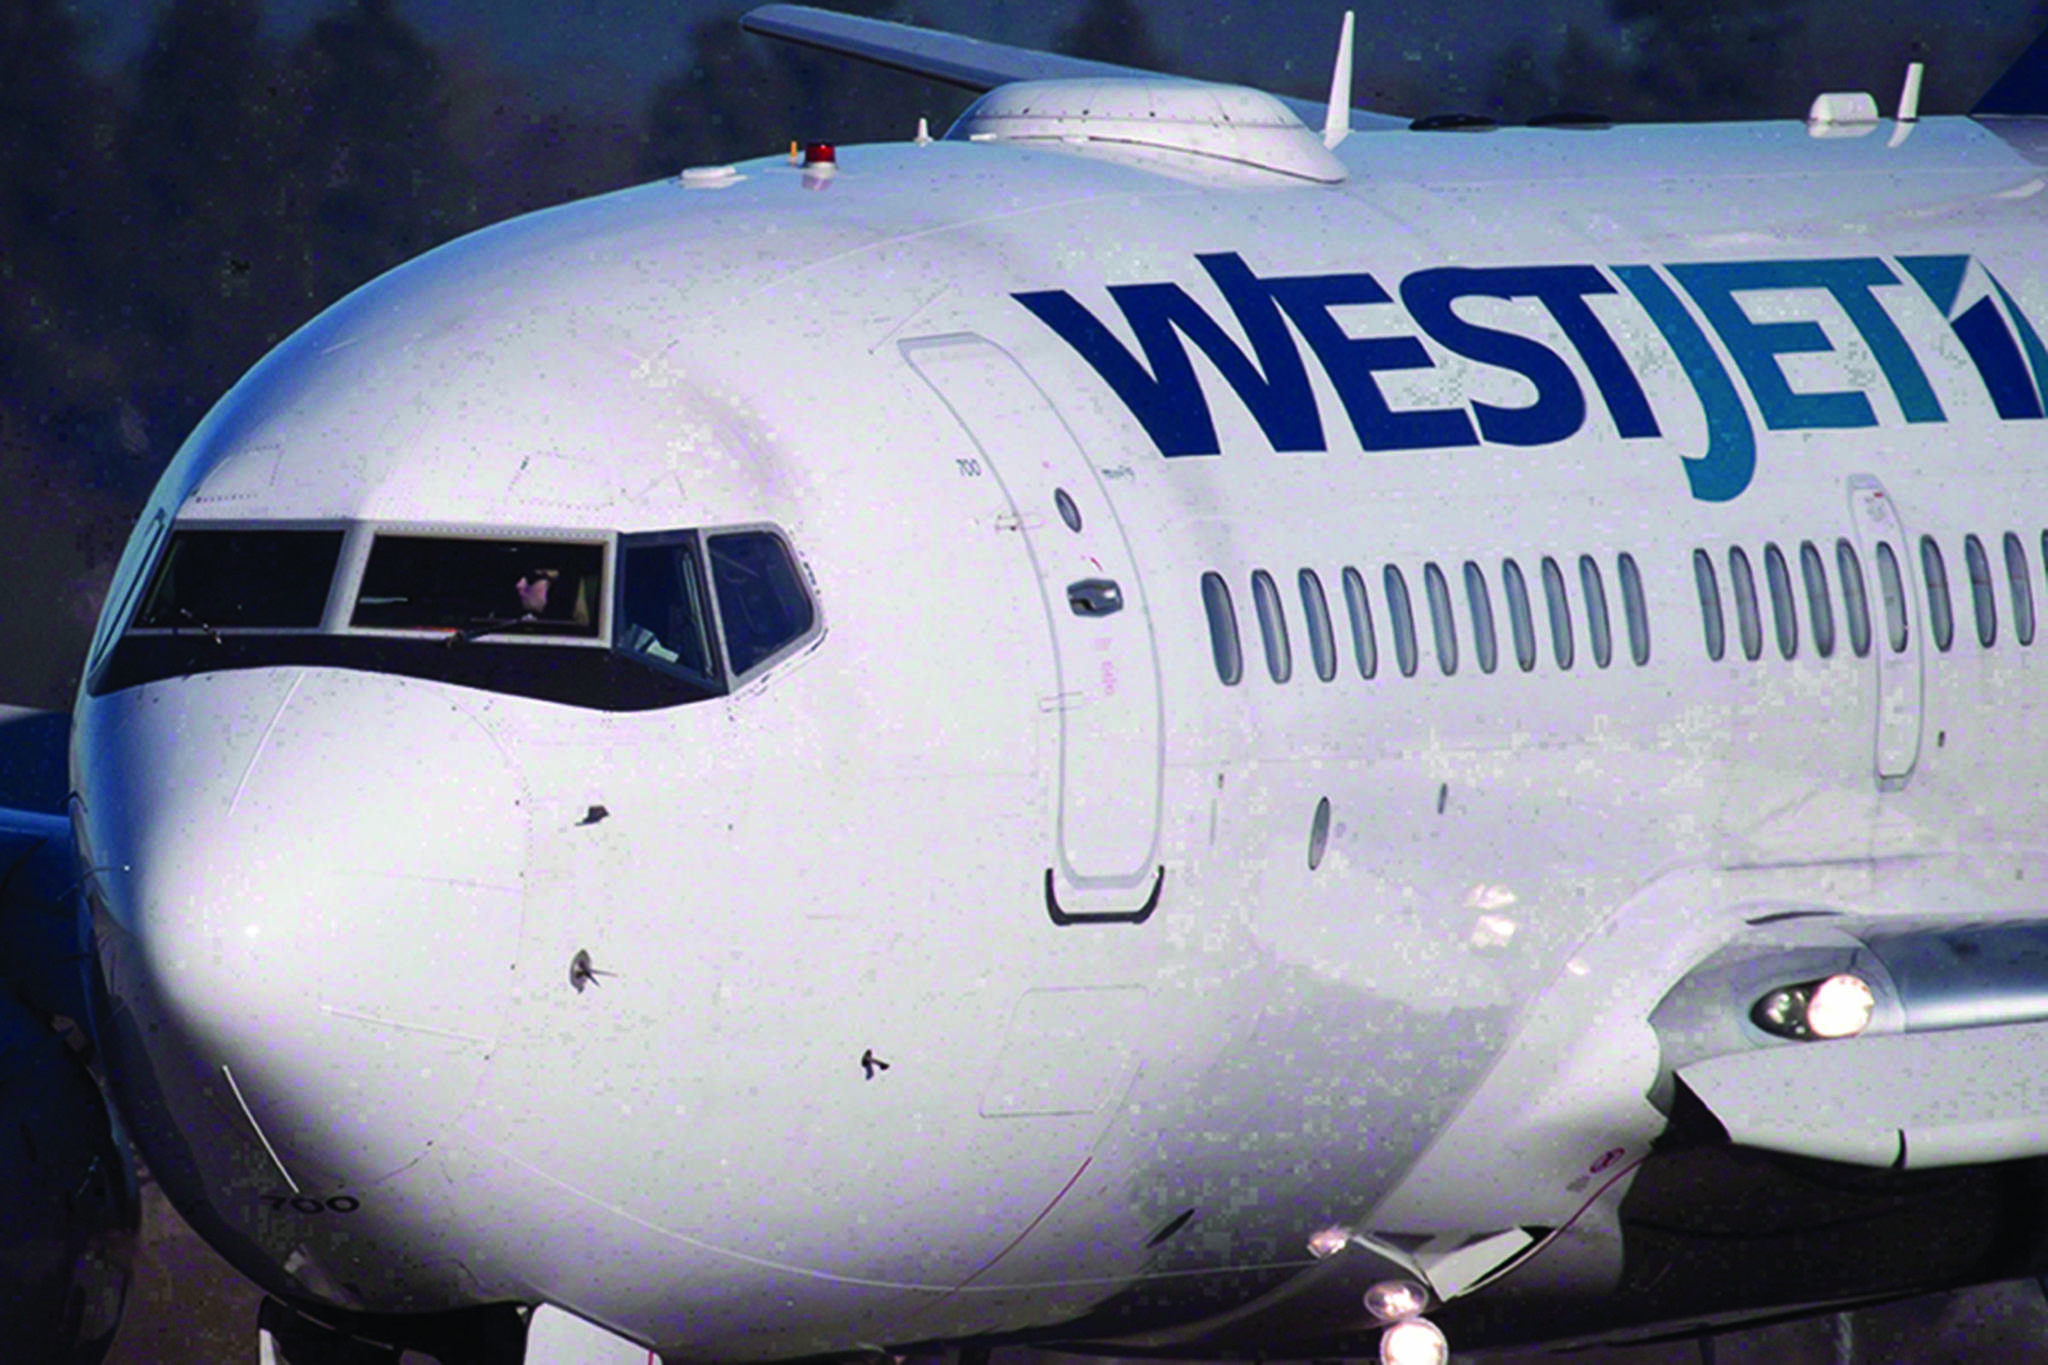 A pilot taxis a Westjet Boeing 737-700 plane to a gate after arriving at Vancouver International Airport on February 3, 2014. The union that represents pilots at WestJet has called for a strike vote to press its demand for a contract. THE CANADIAN PRESS/Darryl Dyck